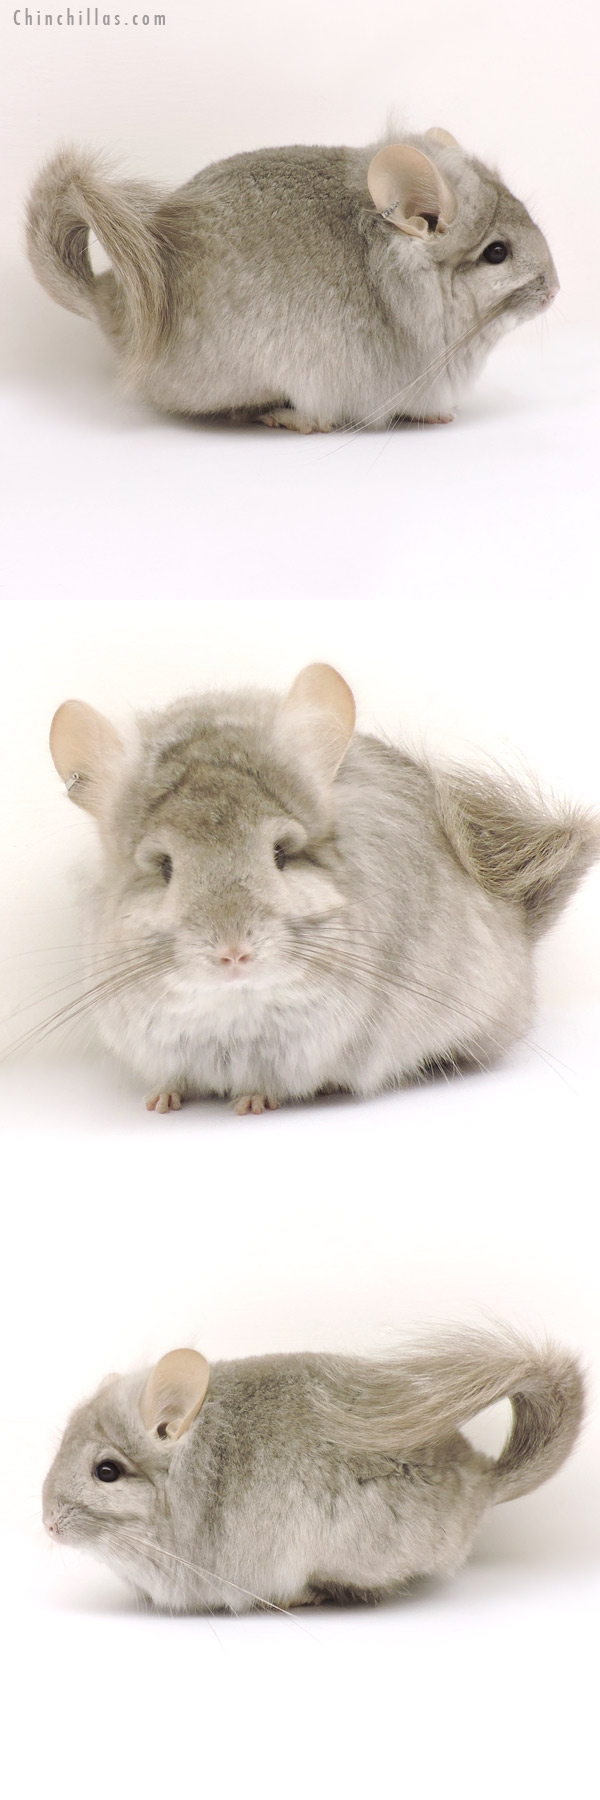 Chinchilla or related item offered for sale or export on Chinchillas.com - 14156 Exceptional Beige  Royal Persian Angora Female Chinchilla with 'lion mane'